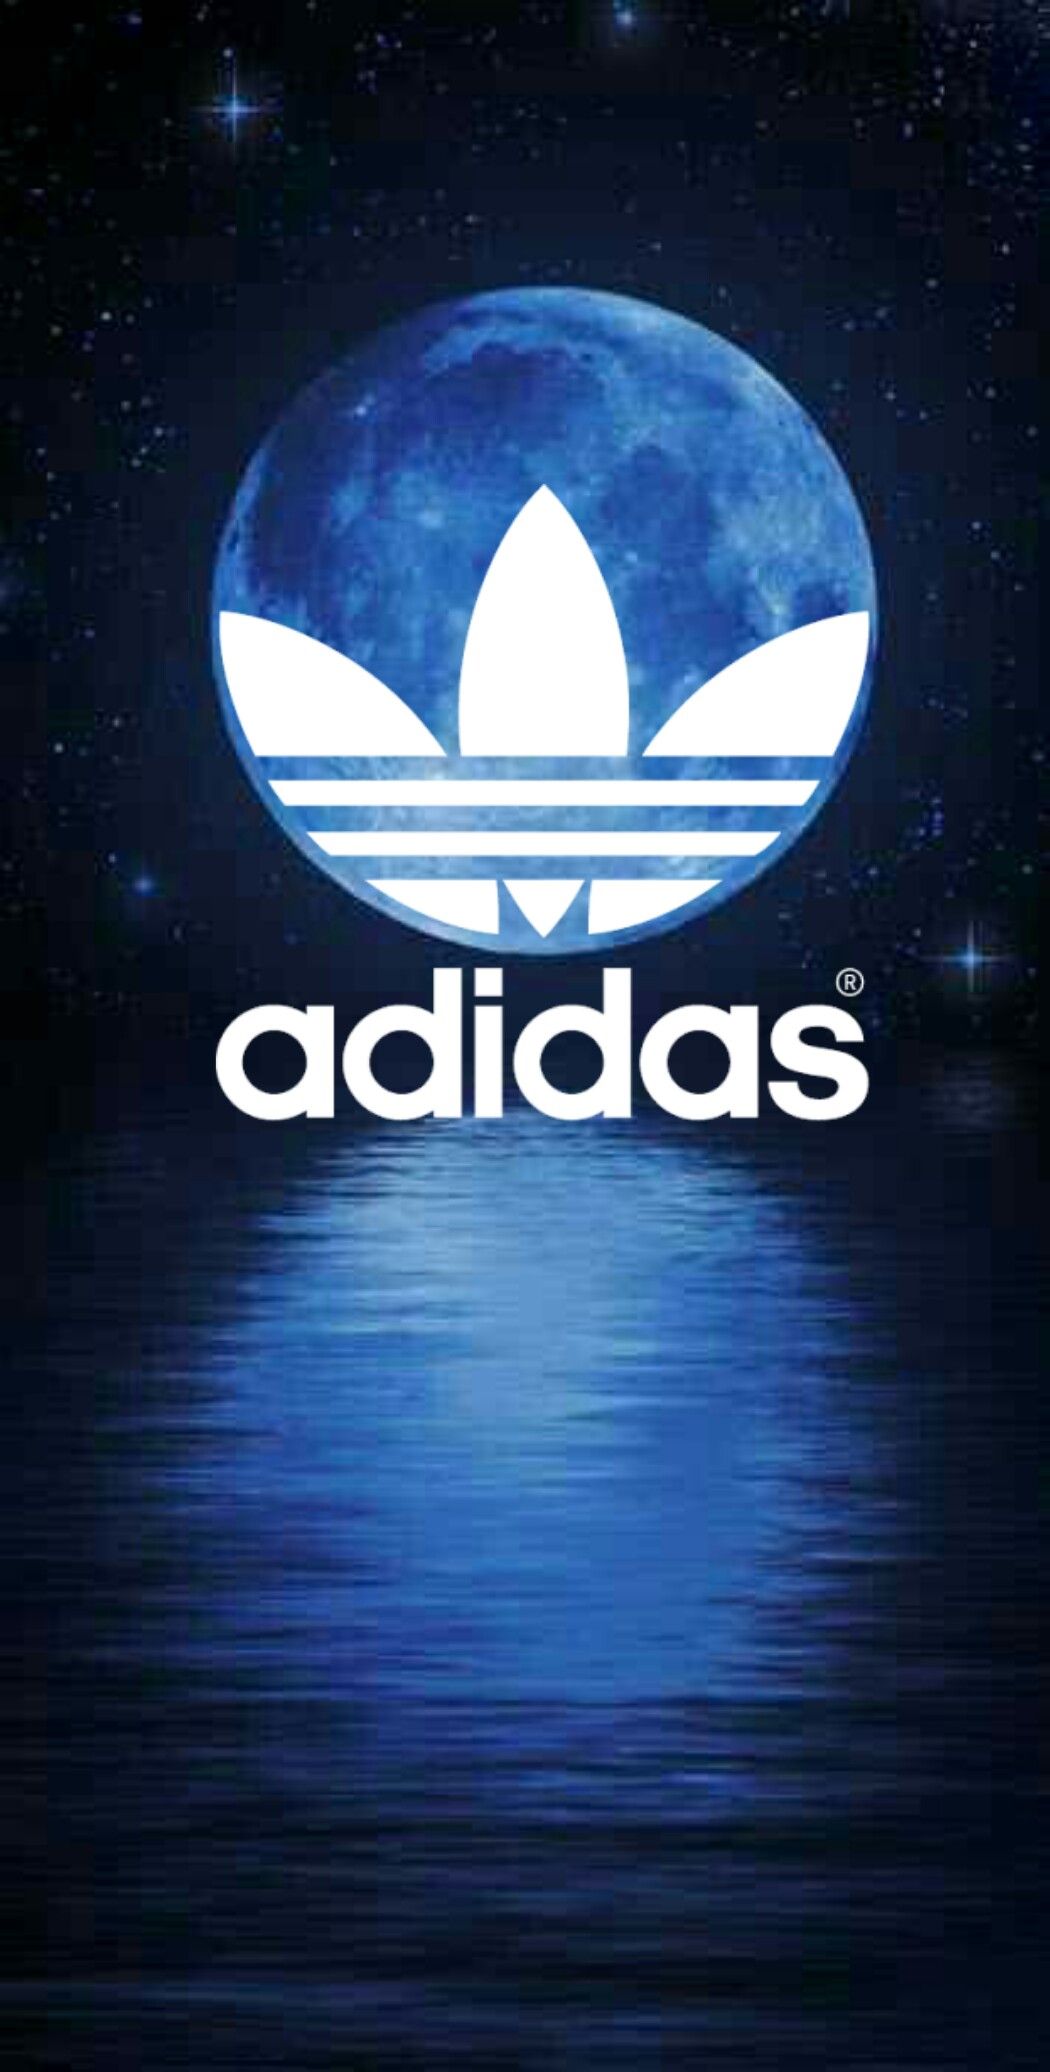 Download wallpapers Adidas logo, cut out 3d text, white background, Adidas  3d logo, Adidas emblem, Adidas, embossed logo, Adidas 3d emblem for desktop  free. Pictures for desktop free